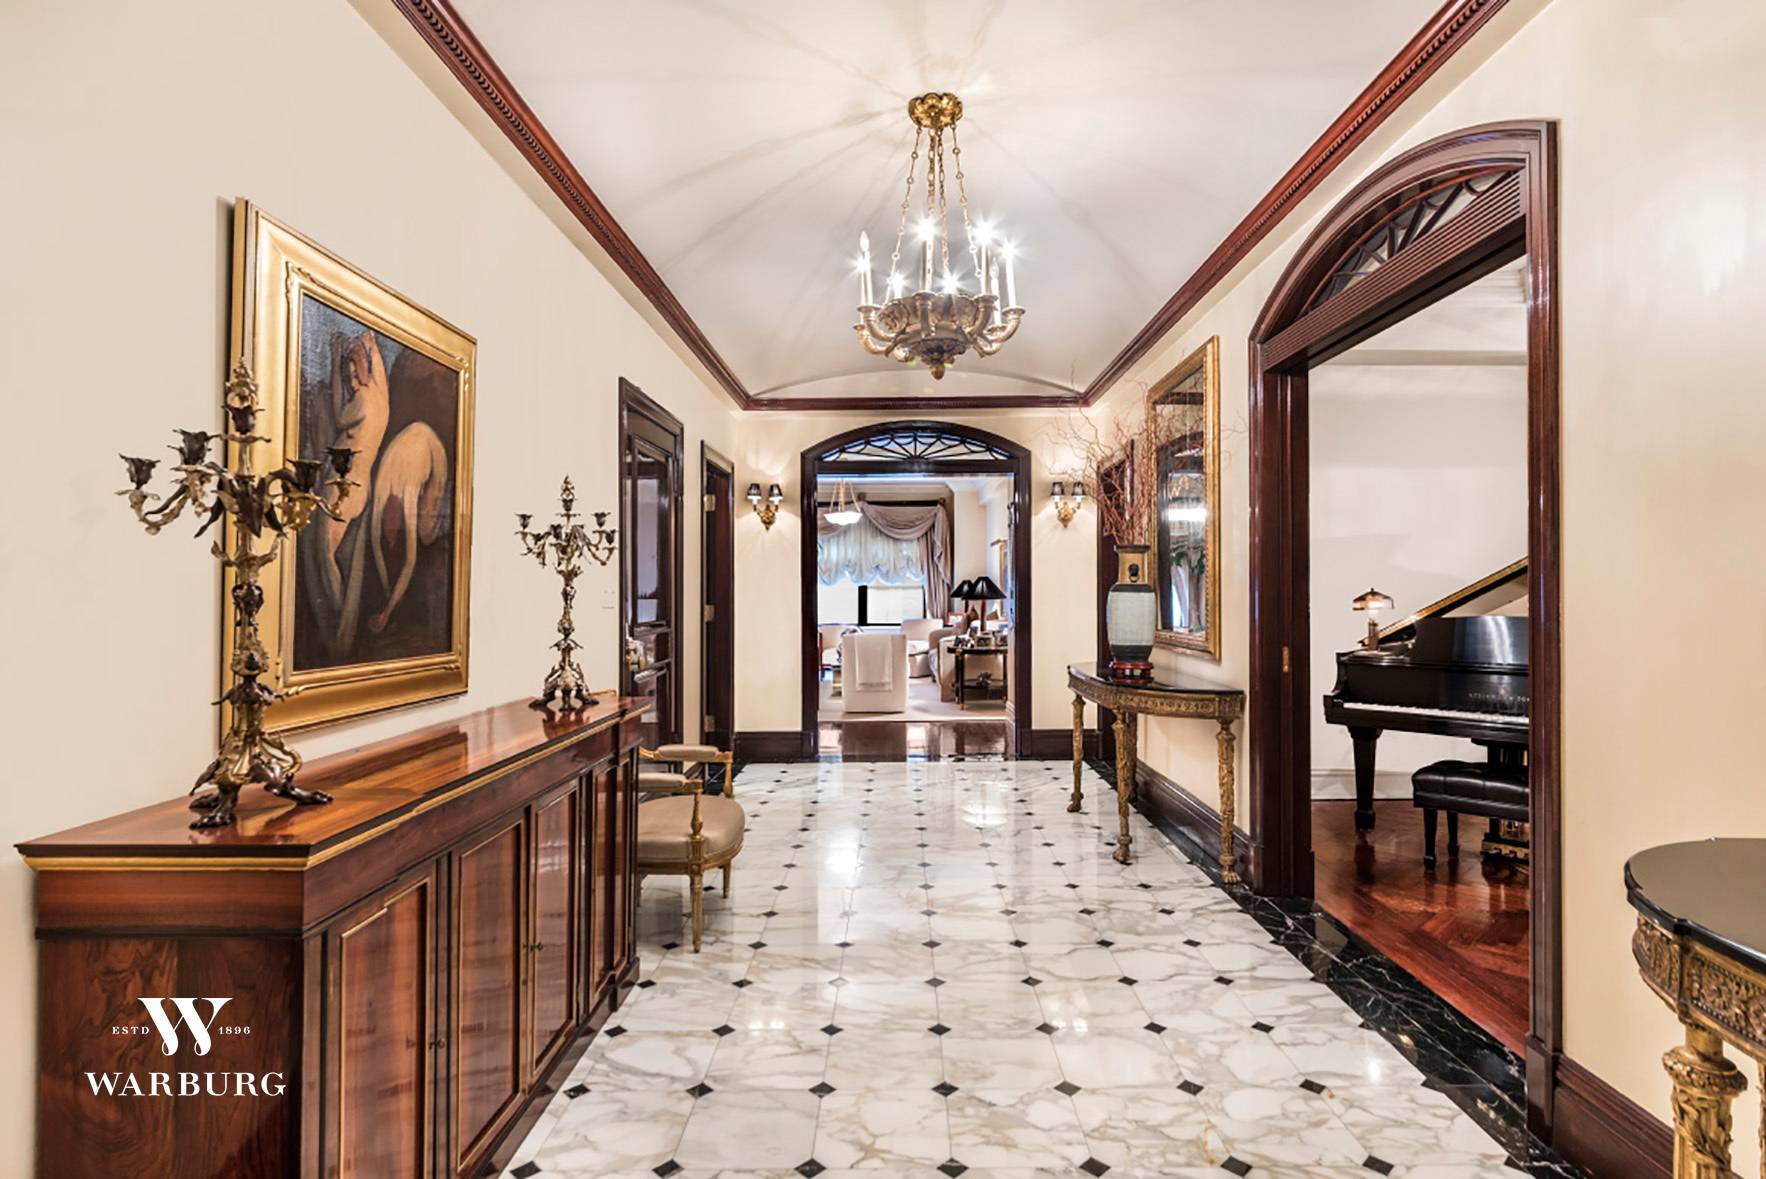 Located on the NW corner of Park Avenue and 83rd Street, this 14 story pre war coop is known for its classical layouts, beautifully proportioned rooms, high ceilings and white ...